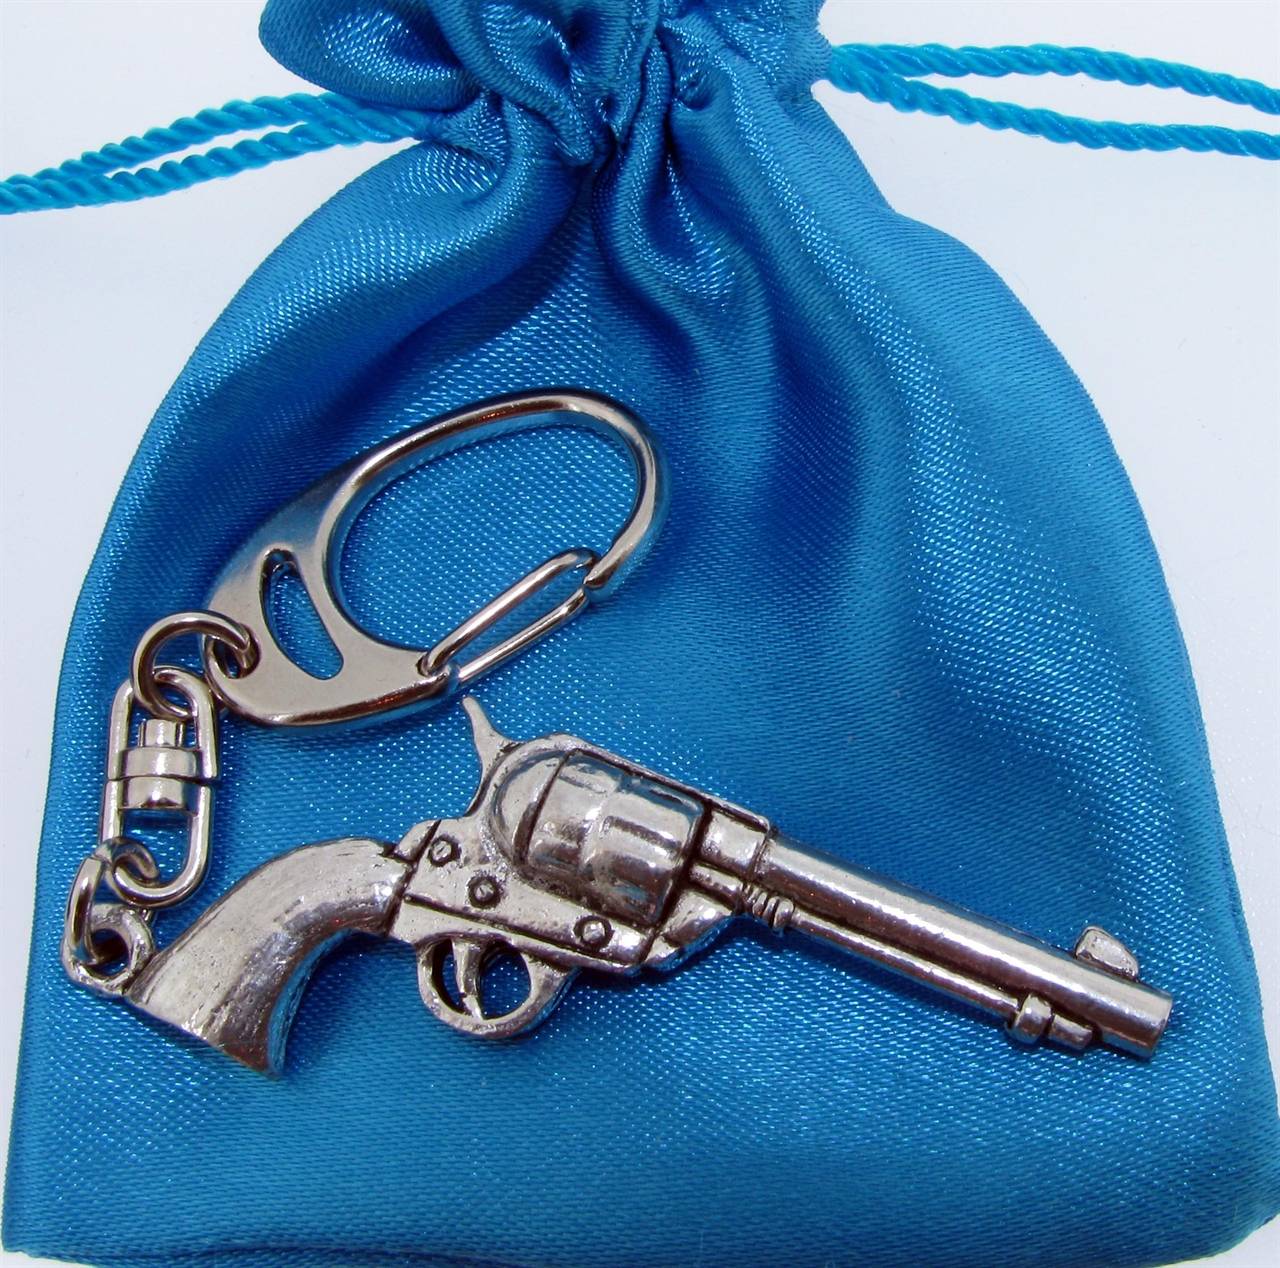 Pistol Keyring - high quality pewter gifts from Pageant Pewter